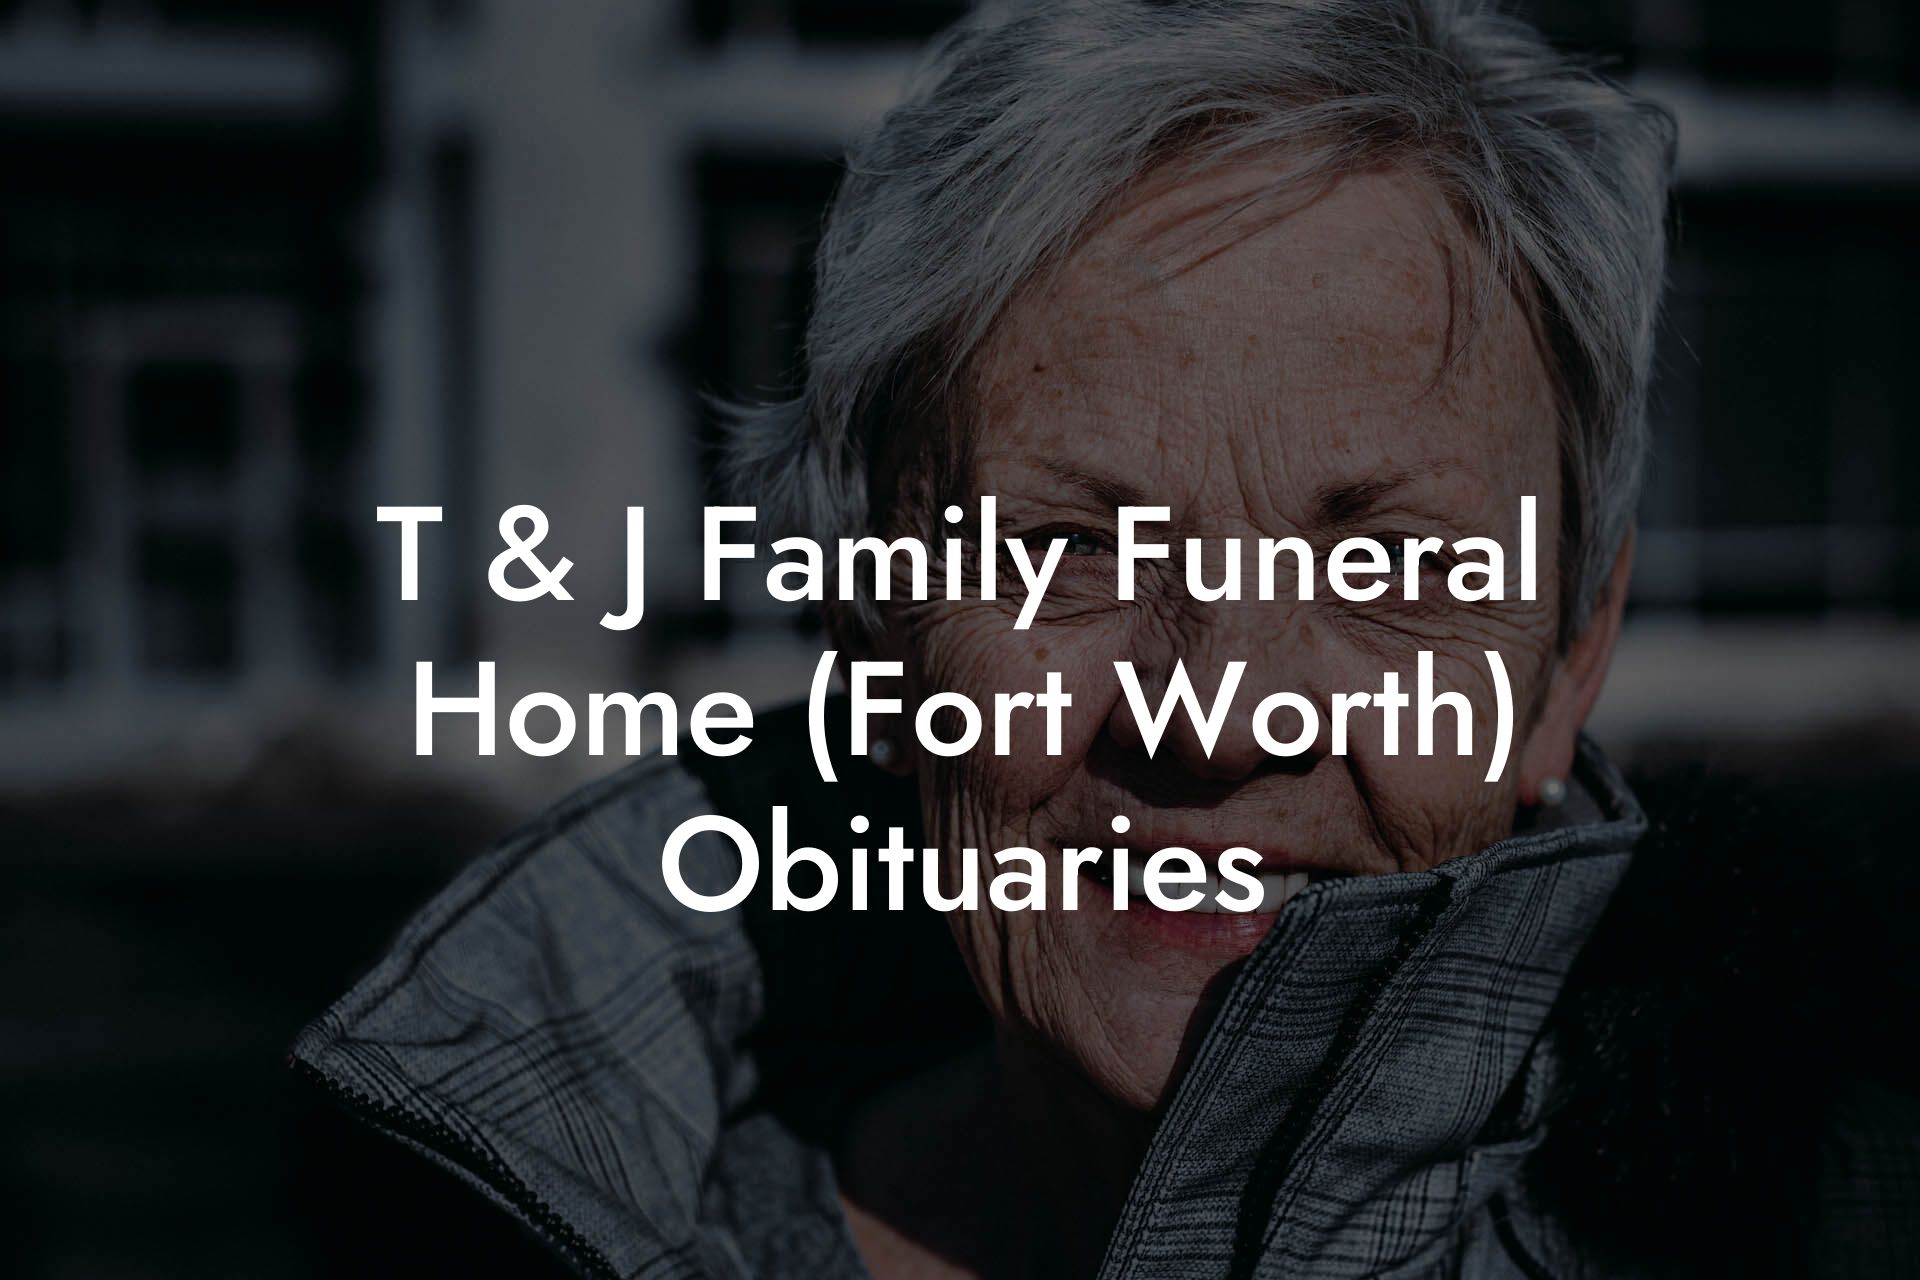 T & J Family Funeral Home (Fort Worth) Obituaries